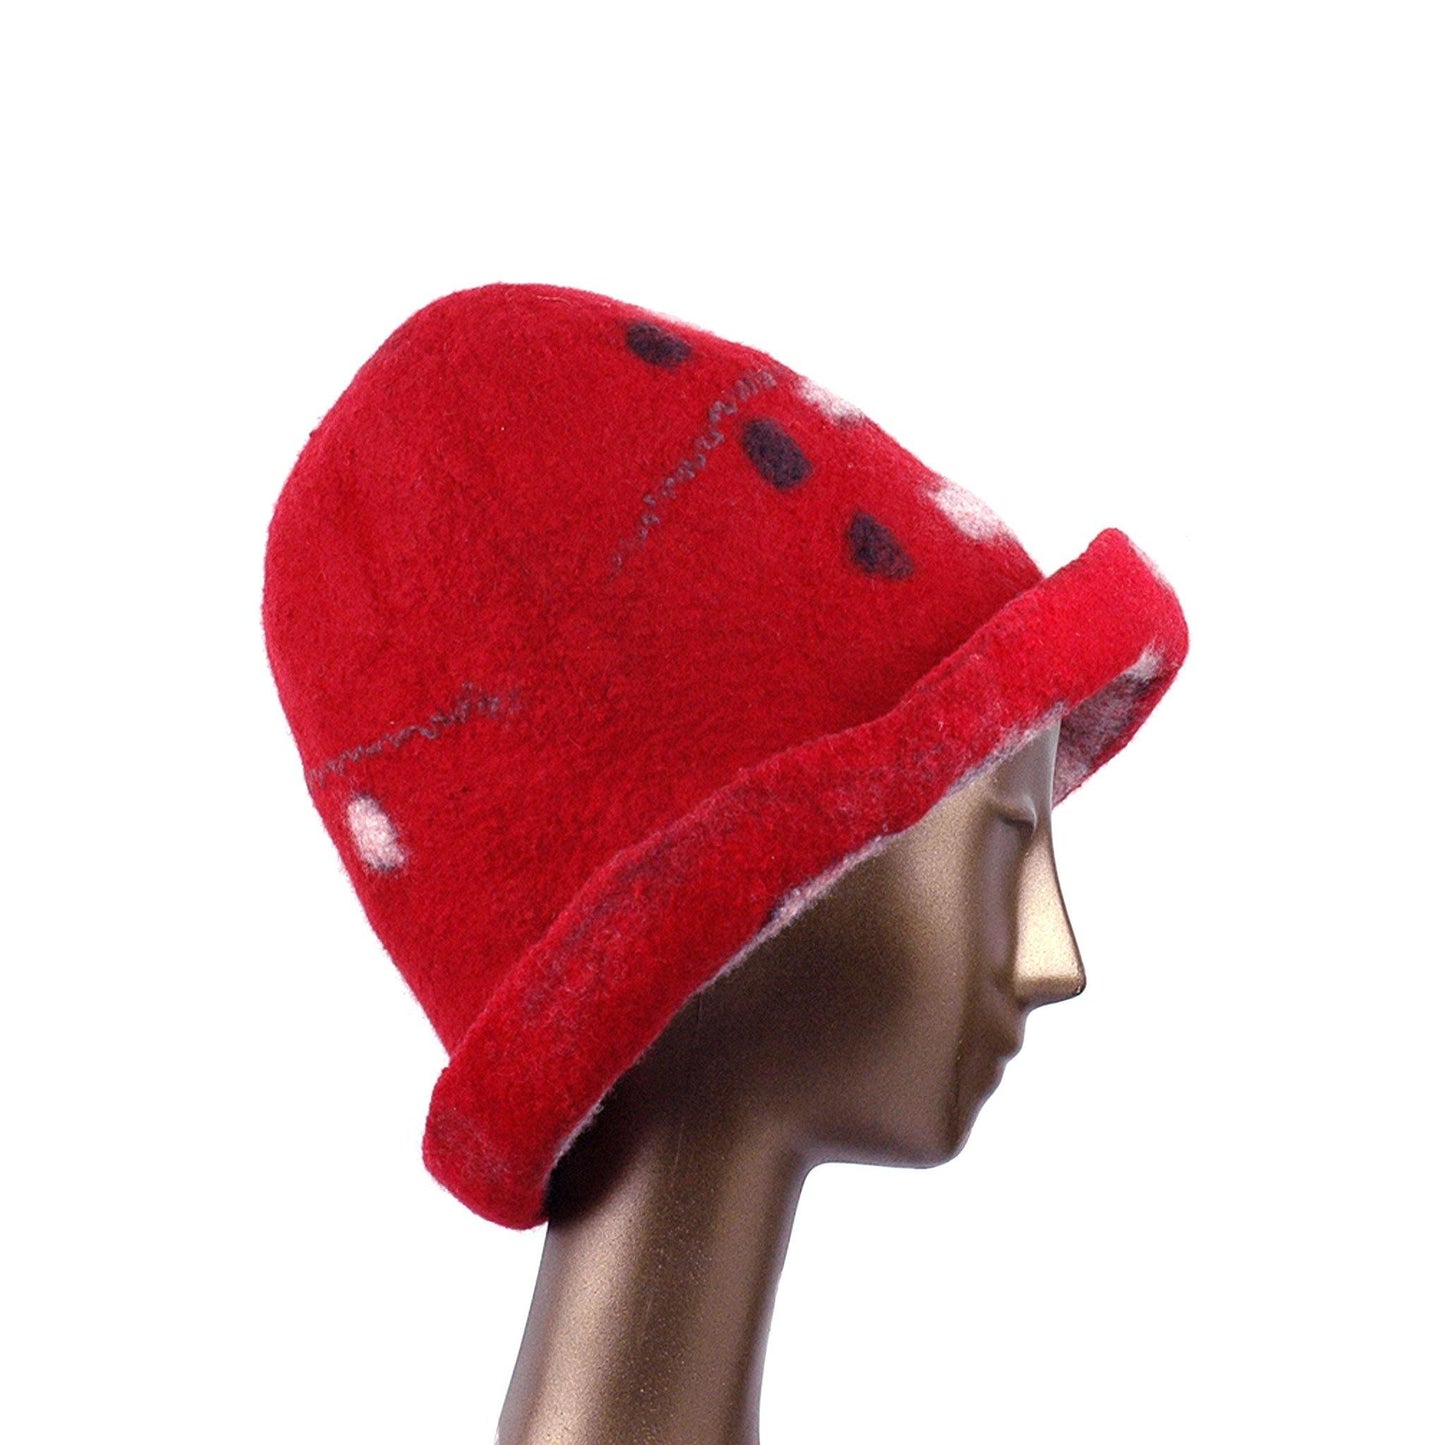 Tall Red and Black Brimmed Hat with Geometric Shapes - side view